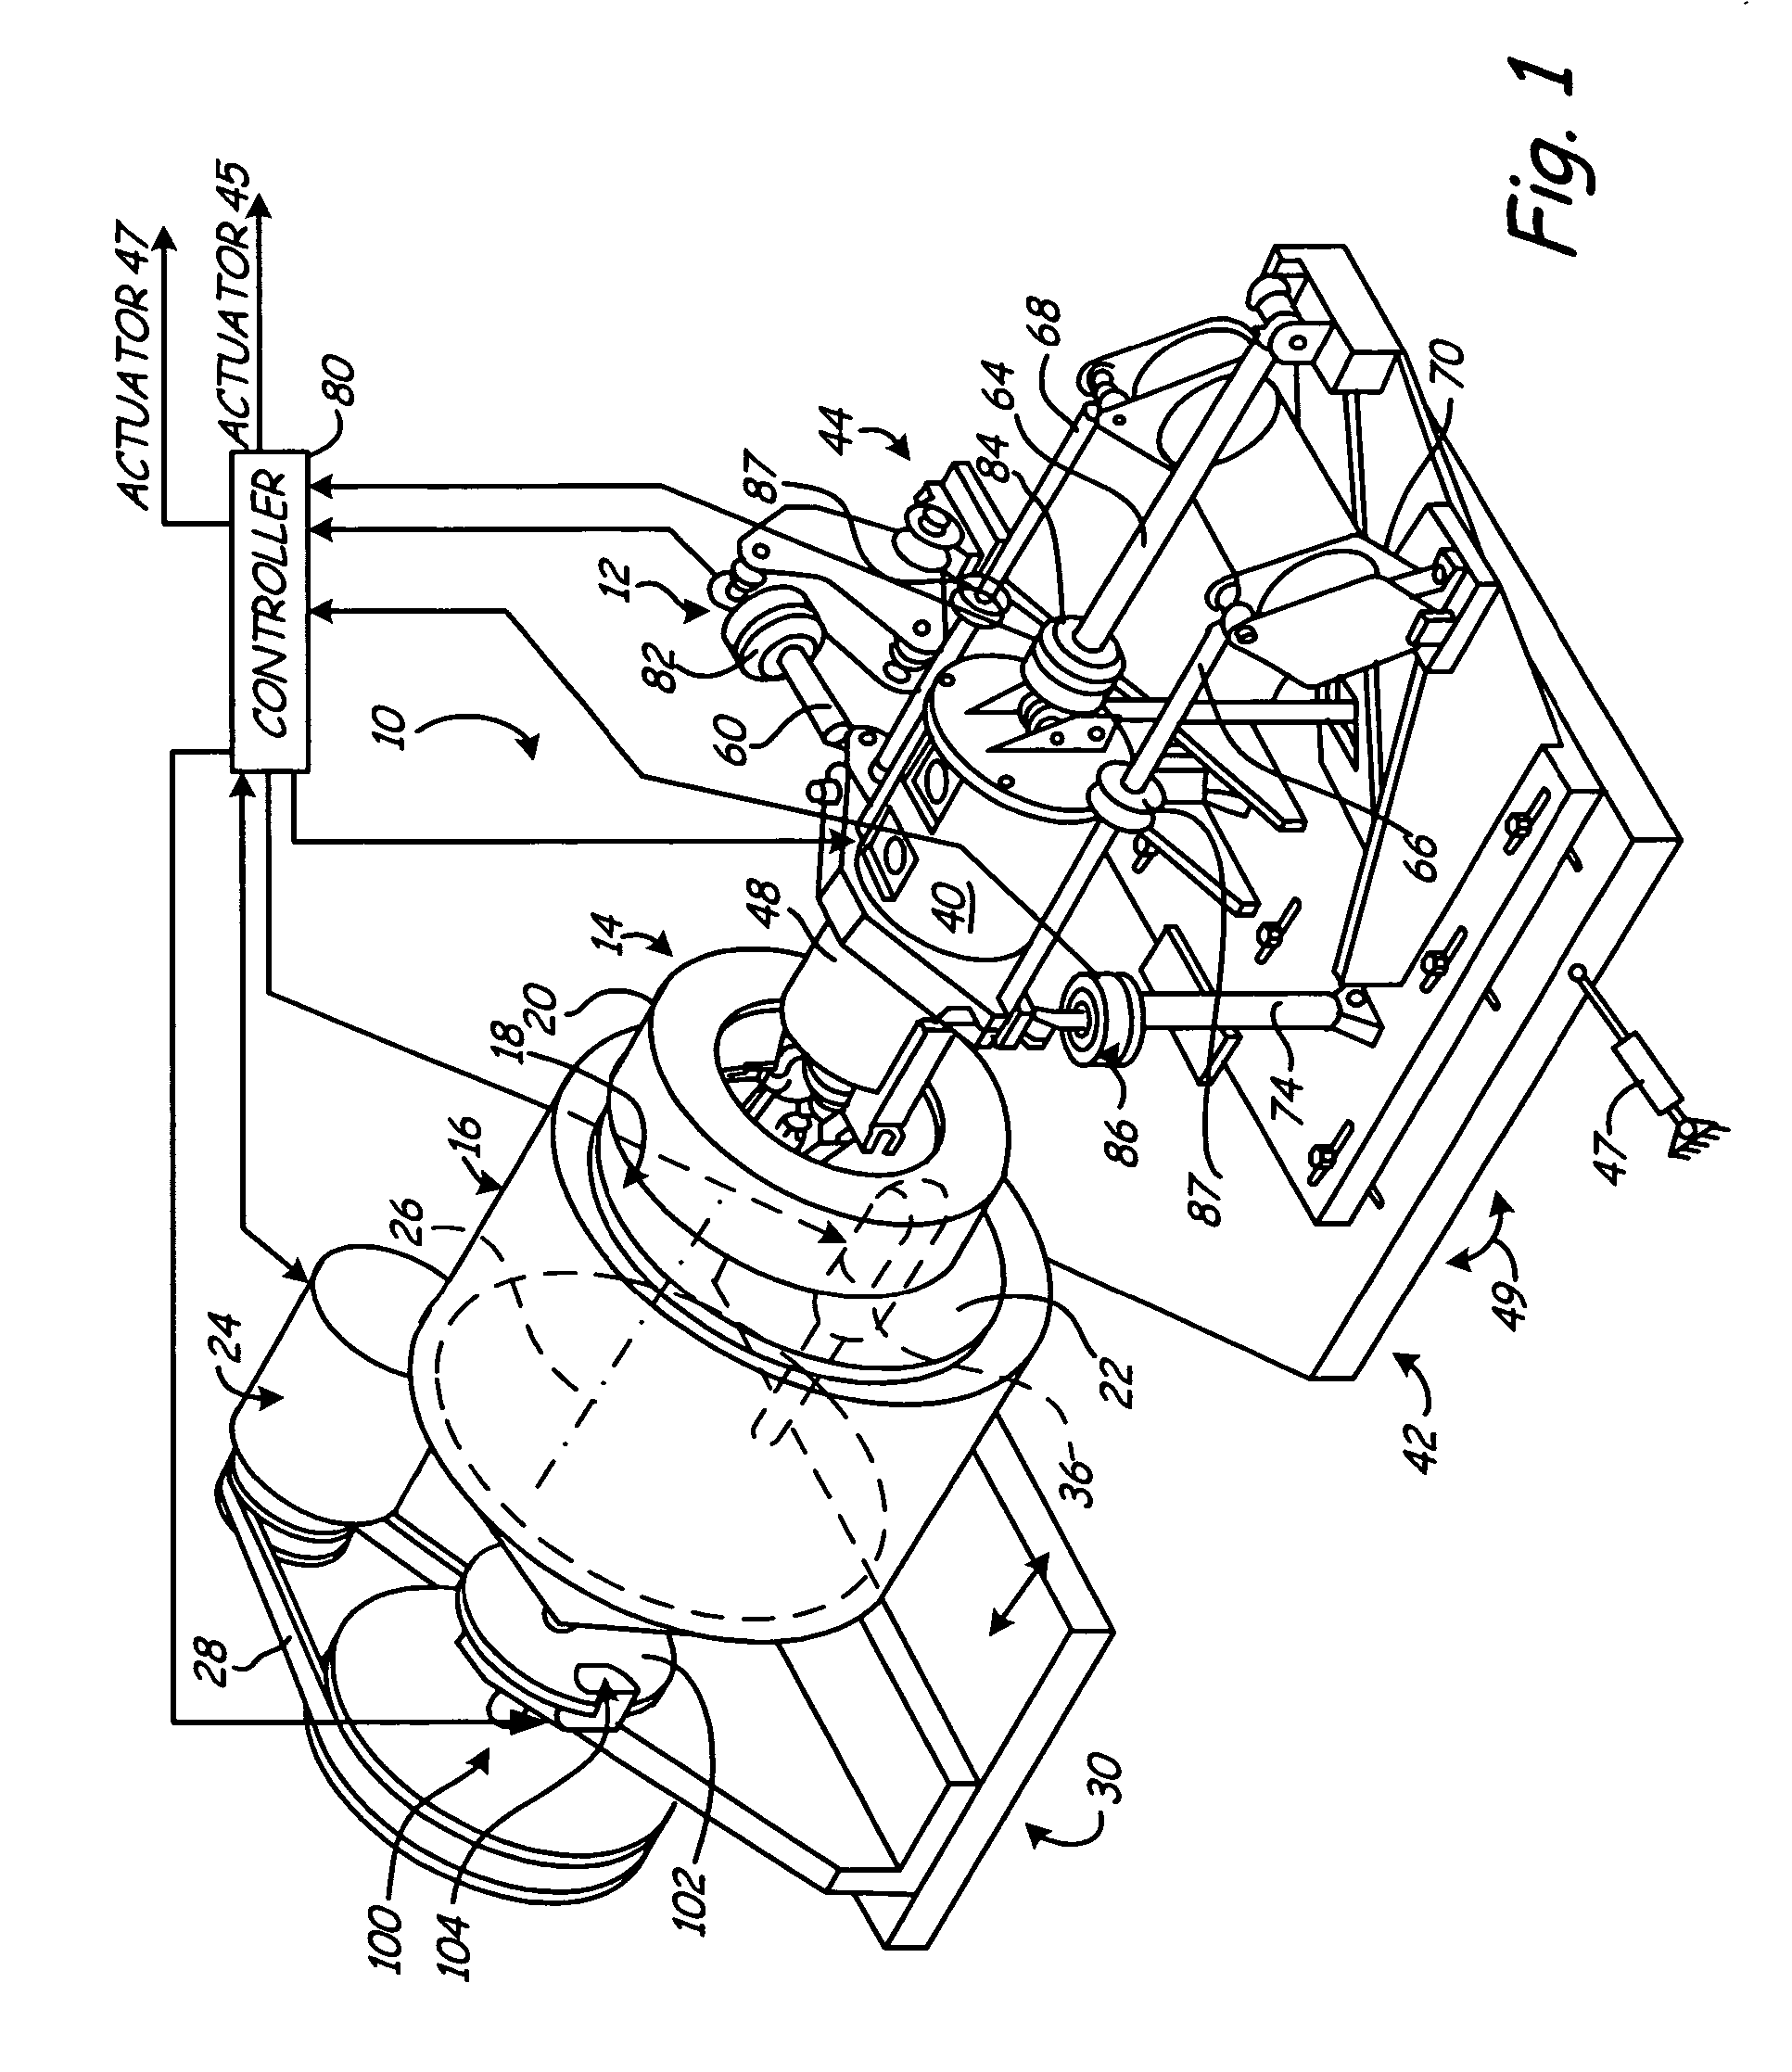 Control methodology for a multi-axial wheel fatigue system